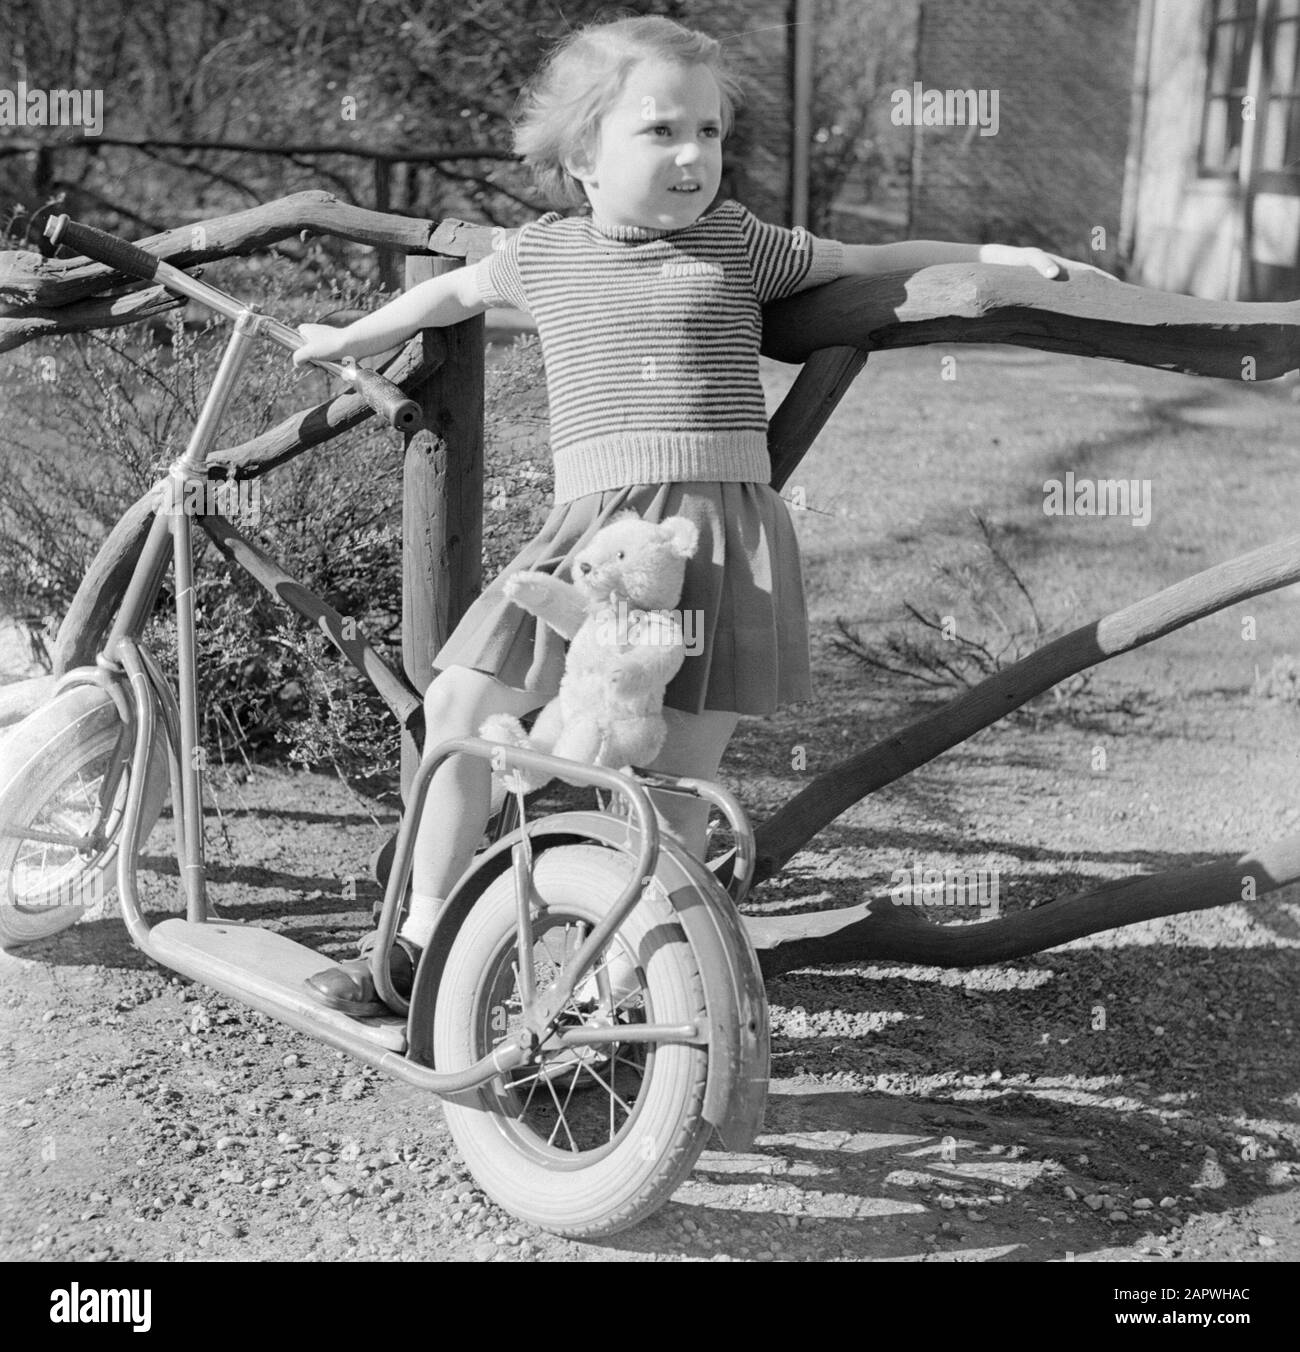 Fashion photography  Girl with autoped and teddy bear Date: 1952 Keywords: autopeds, clothing, girls Stock Photo